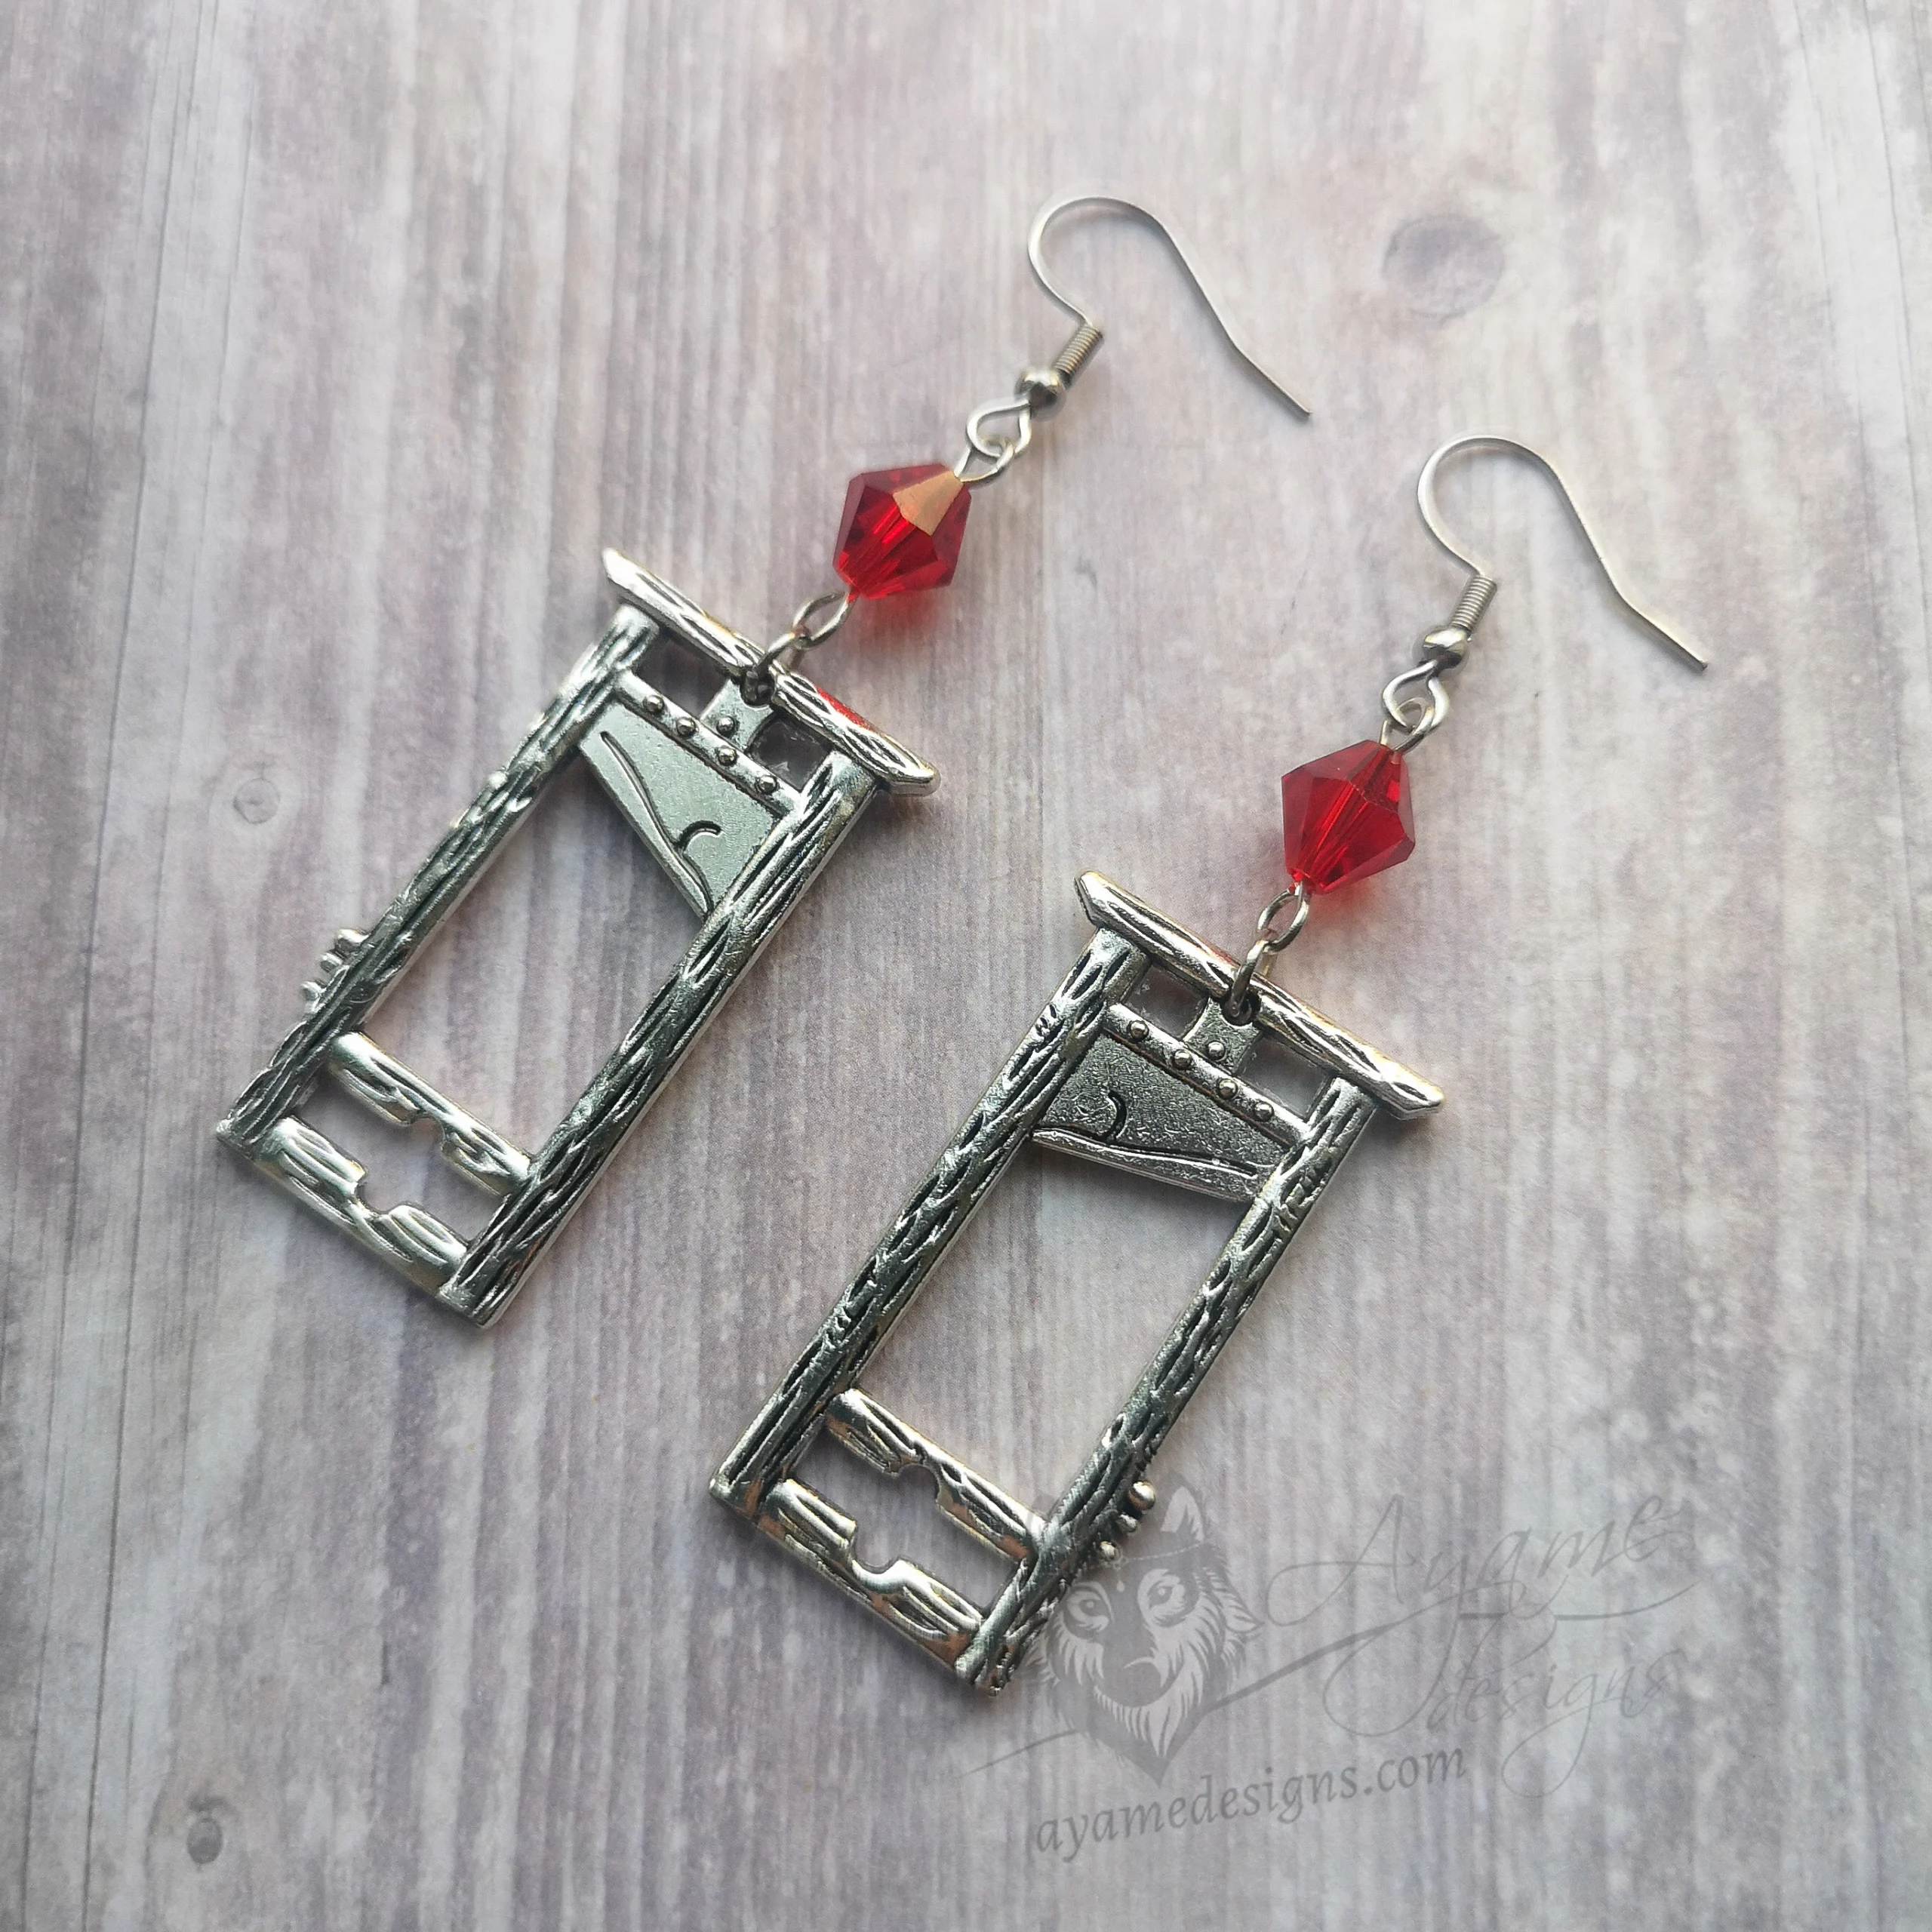 Handmade gothic guillotine earrings with red Austrian crystal beads on stainless steel earring hooks